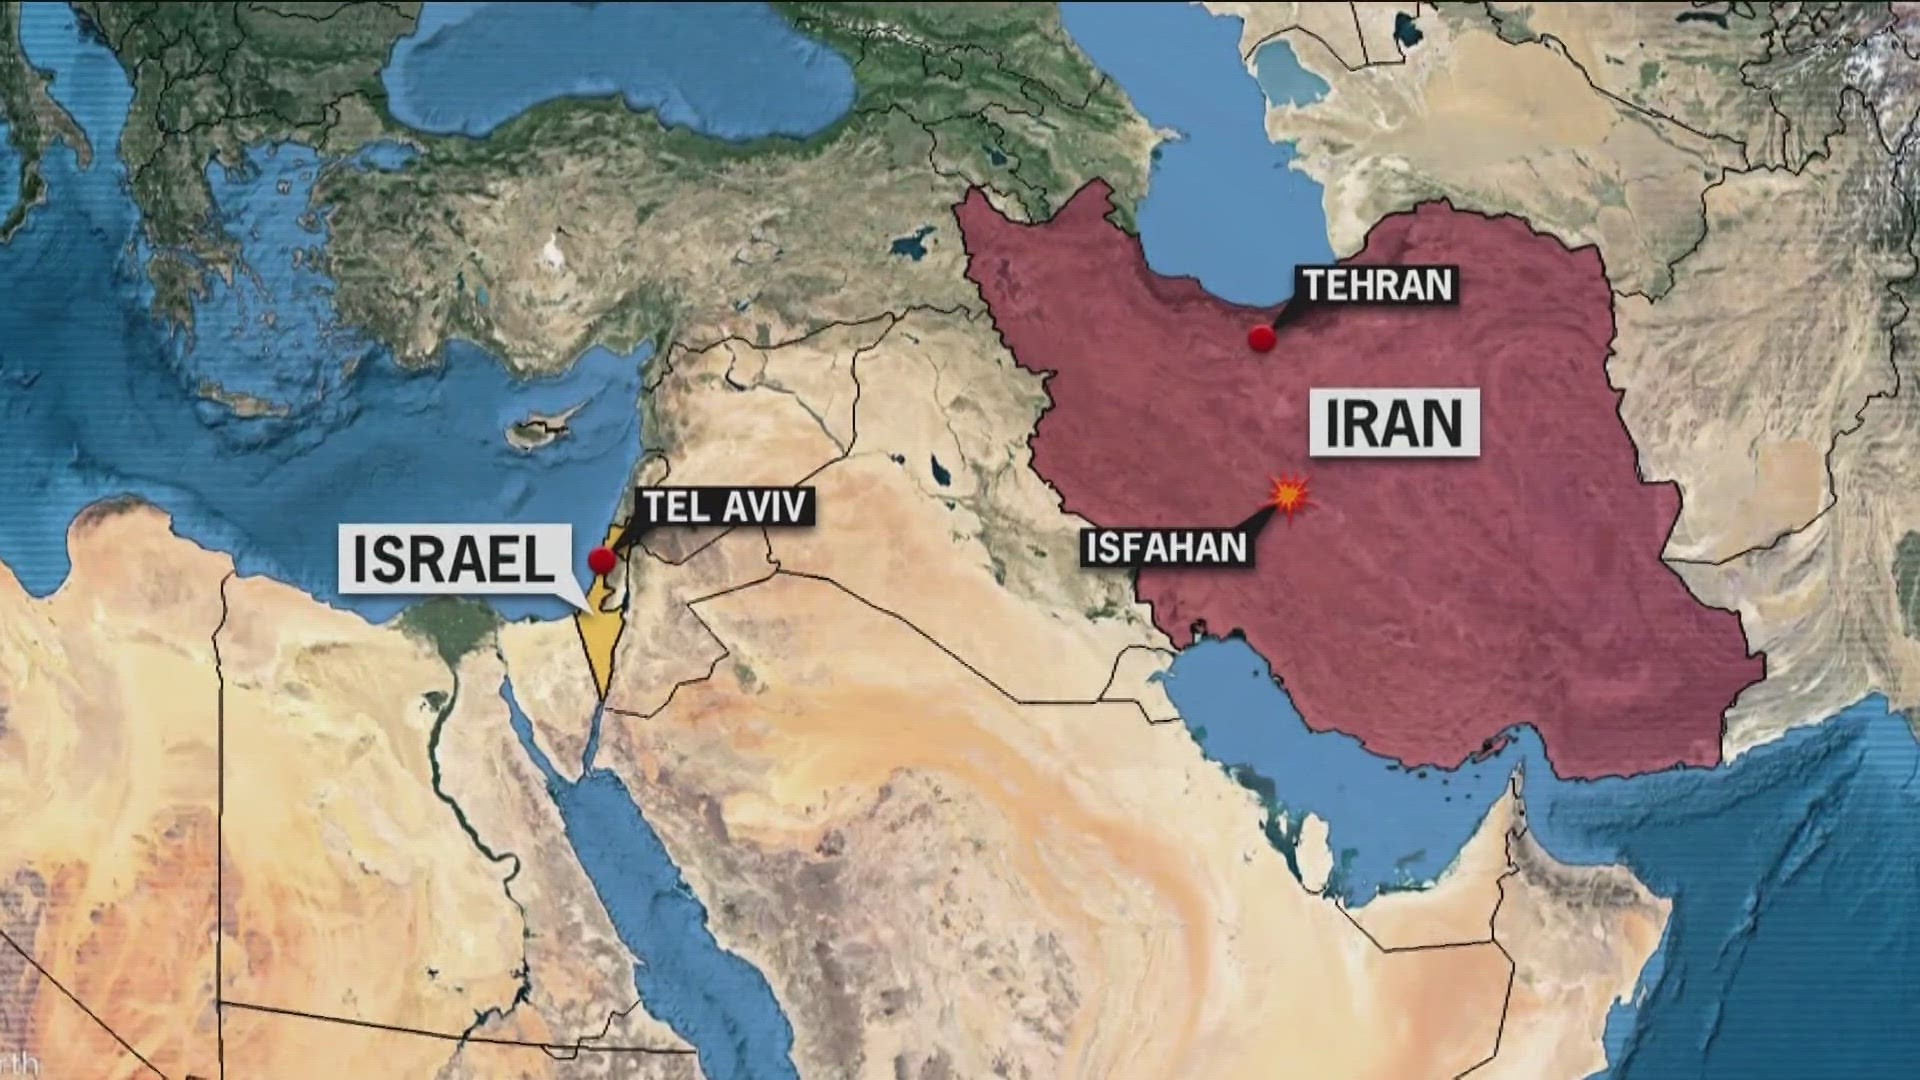 A source familiar with the situation described it as a “limited strike” inside of Iran, that doesn’t yet appear to be rapidly escalating the conflict.